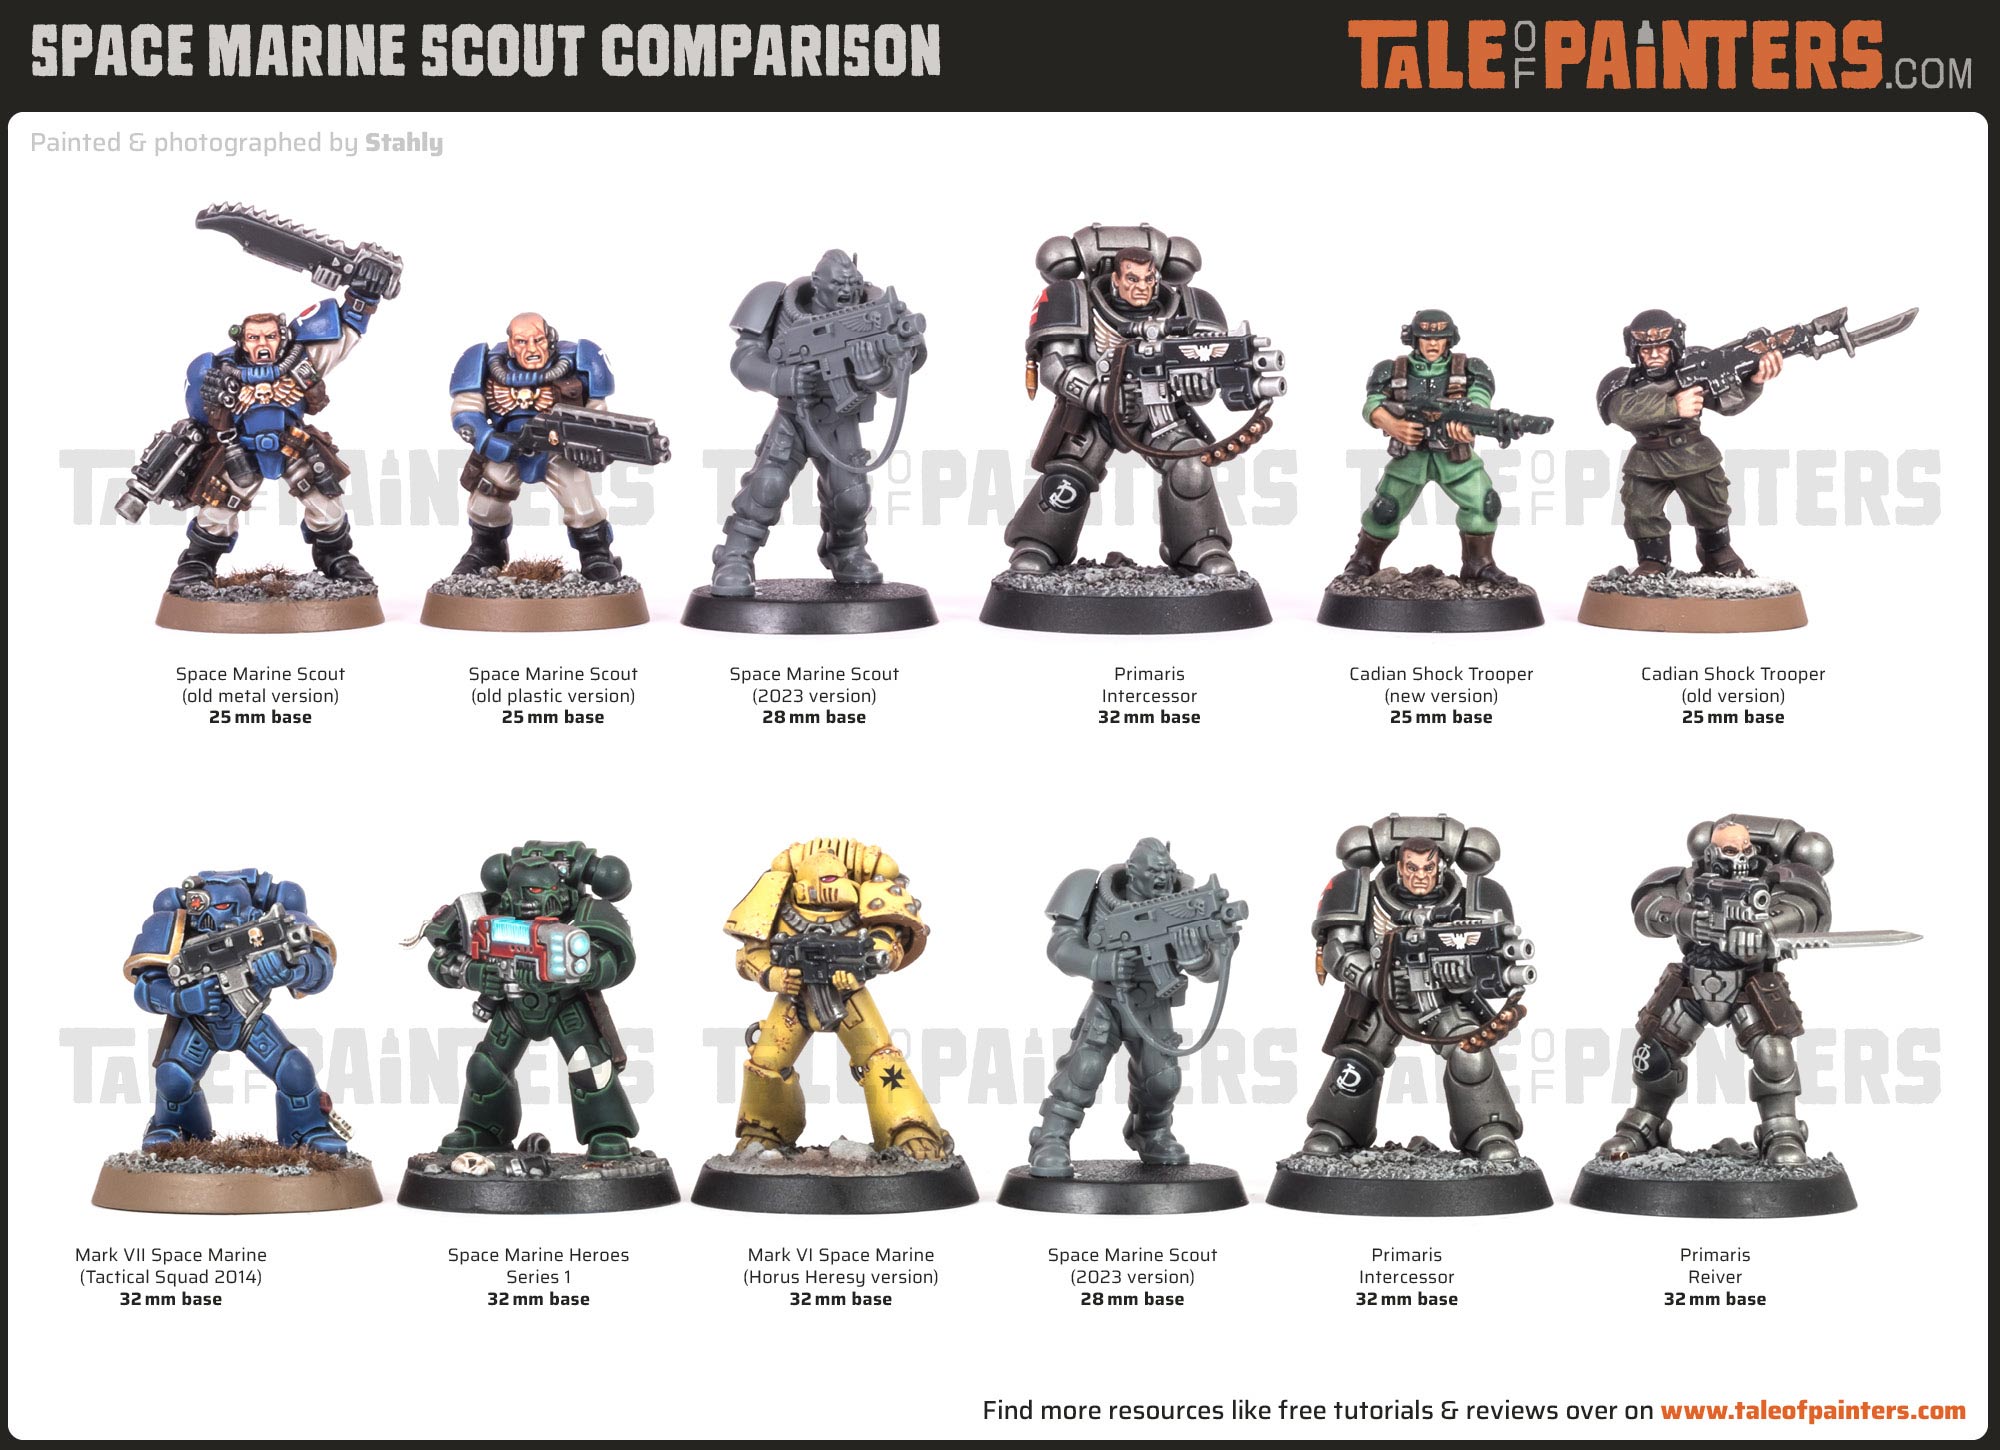 New plastic Space Marine Scouts scale comparison with old Scouts and Primaris Marines